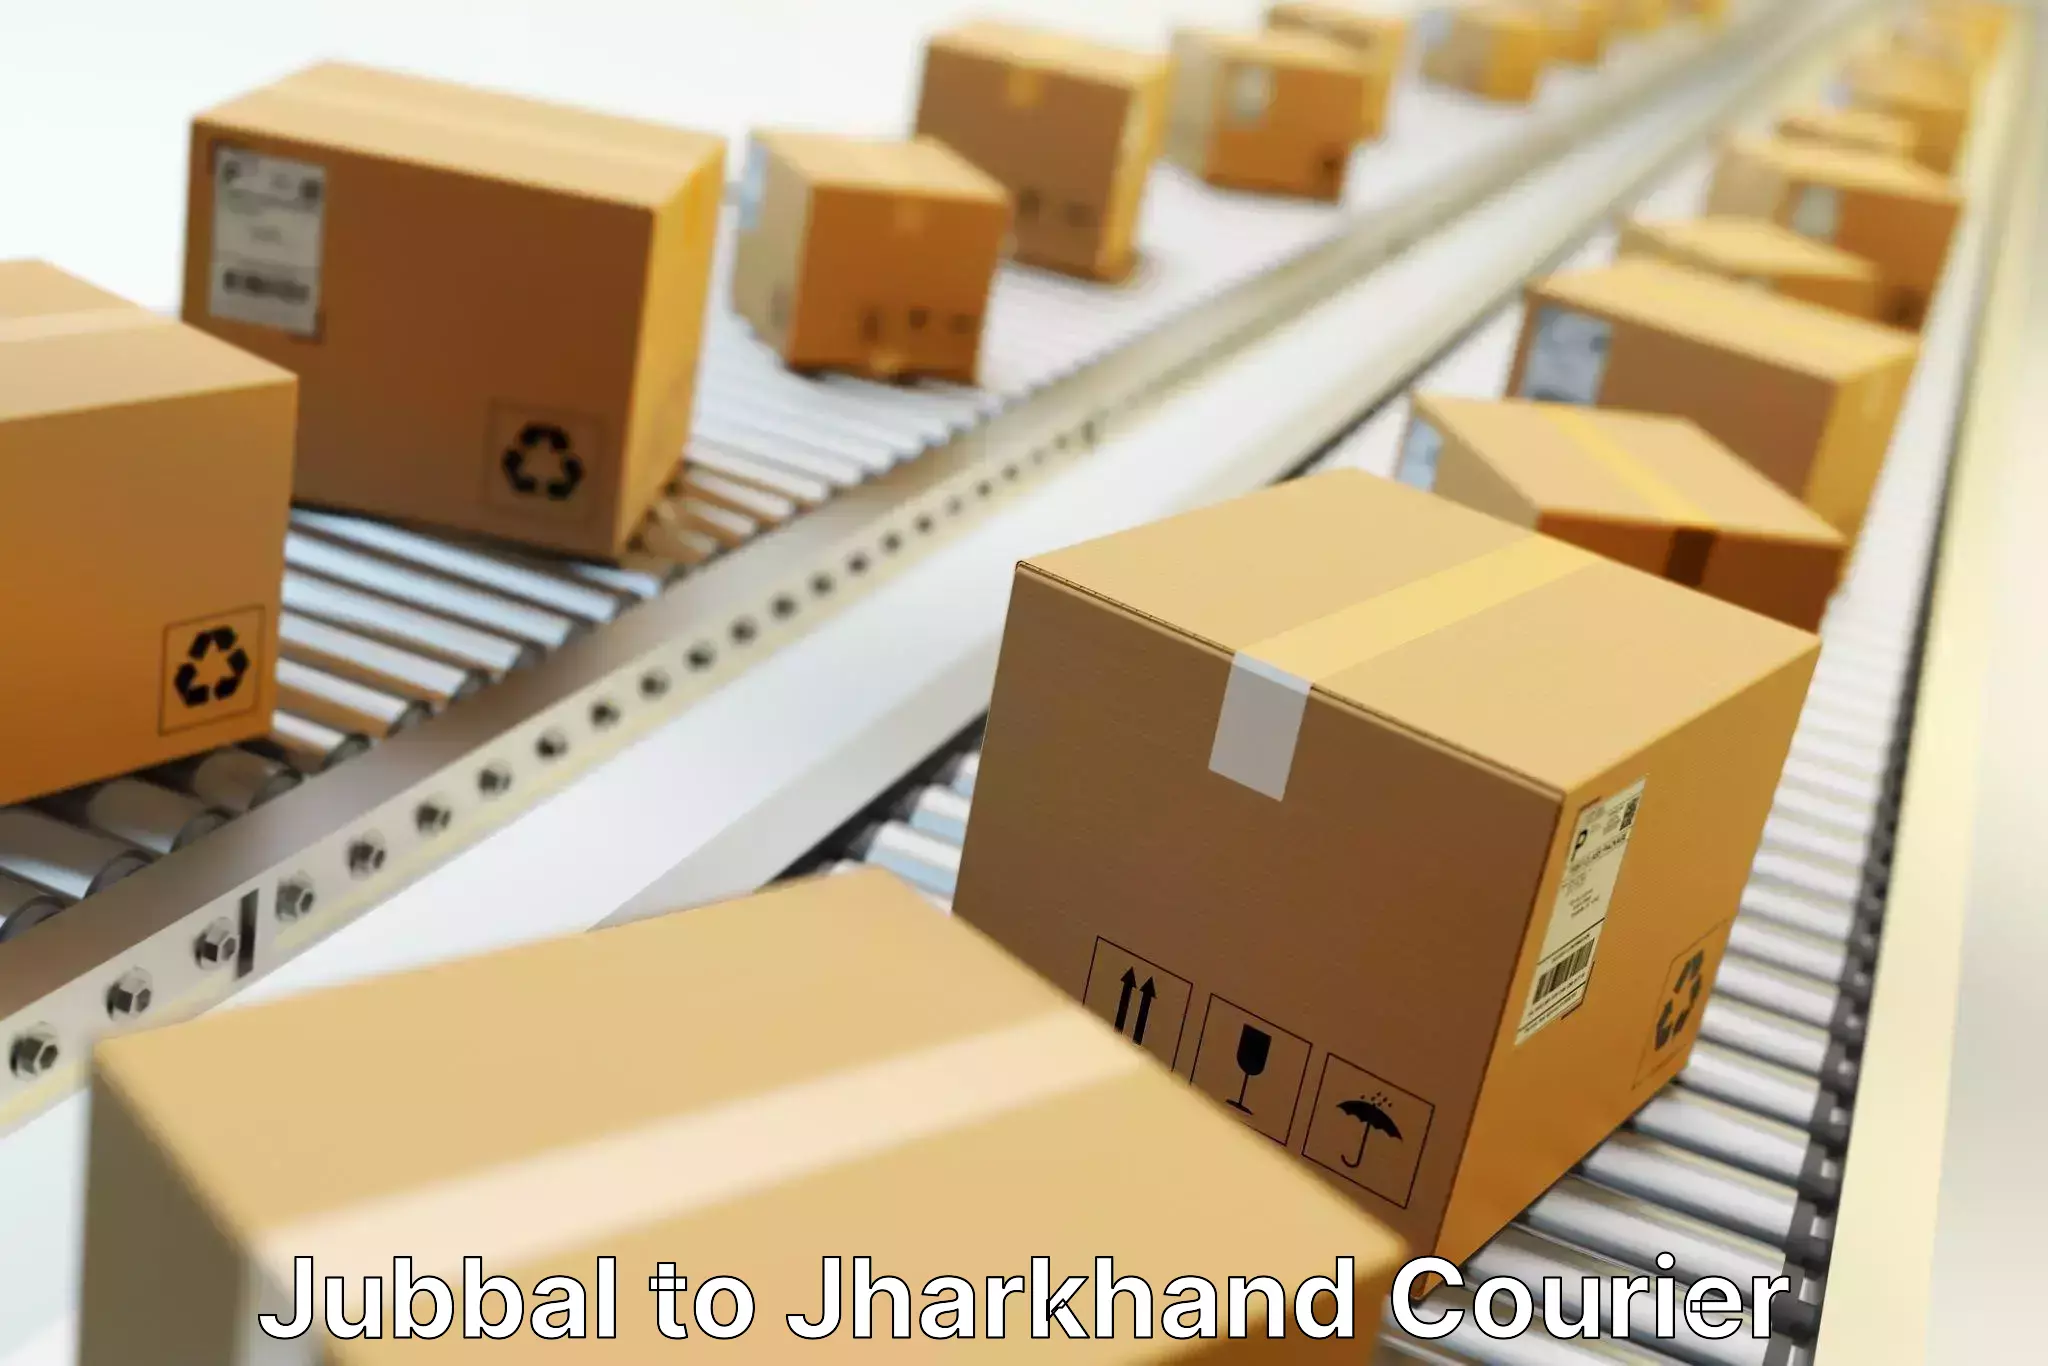 Full-service courier options Jubbal to Domchanch